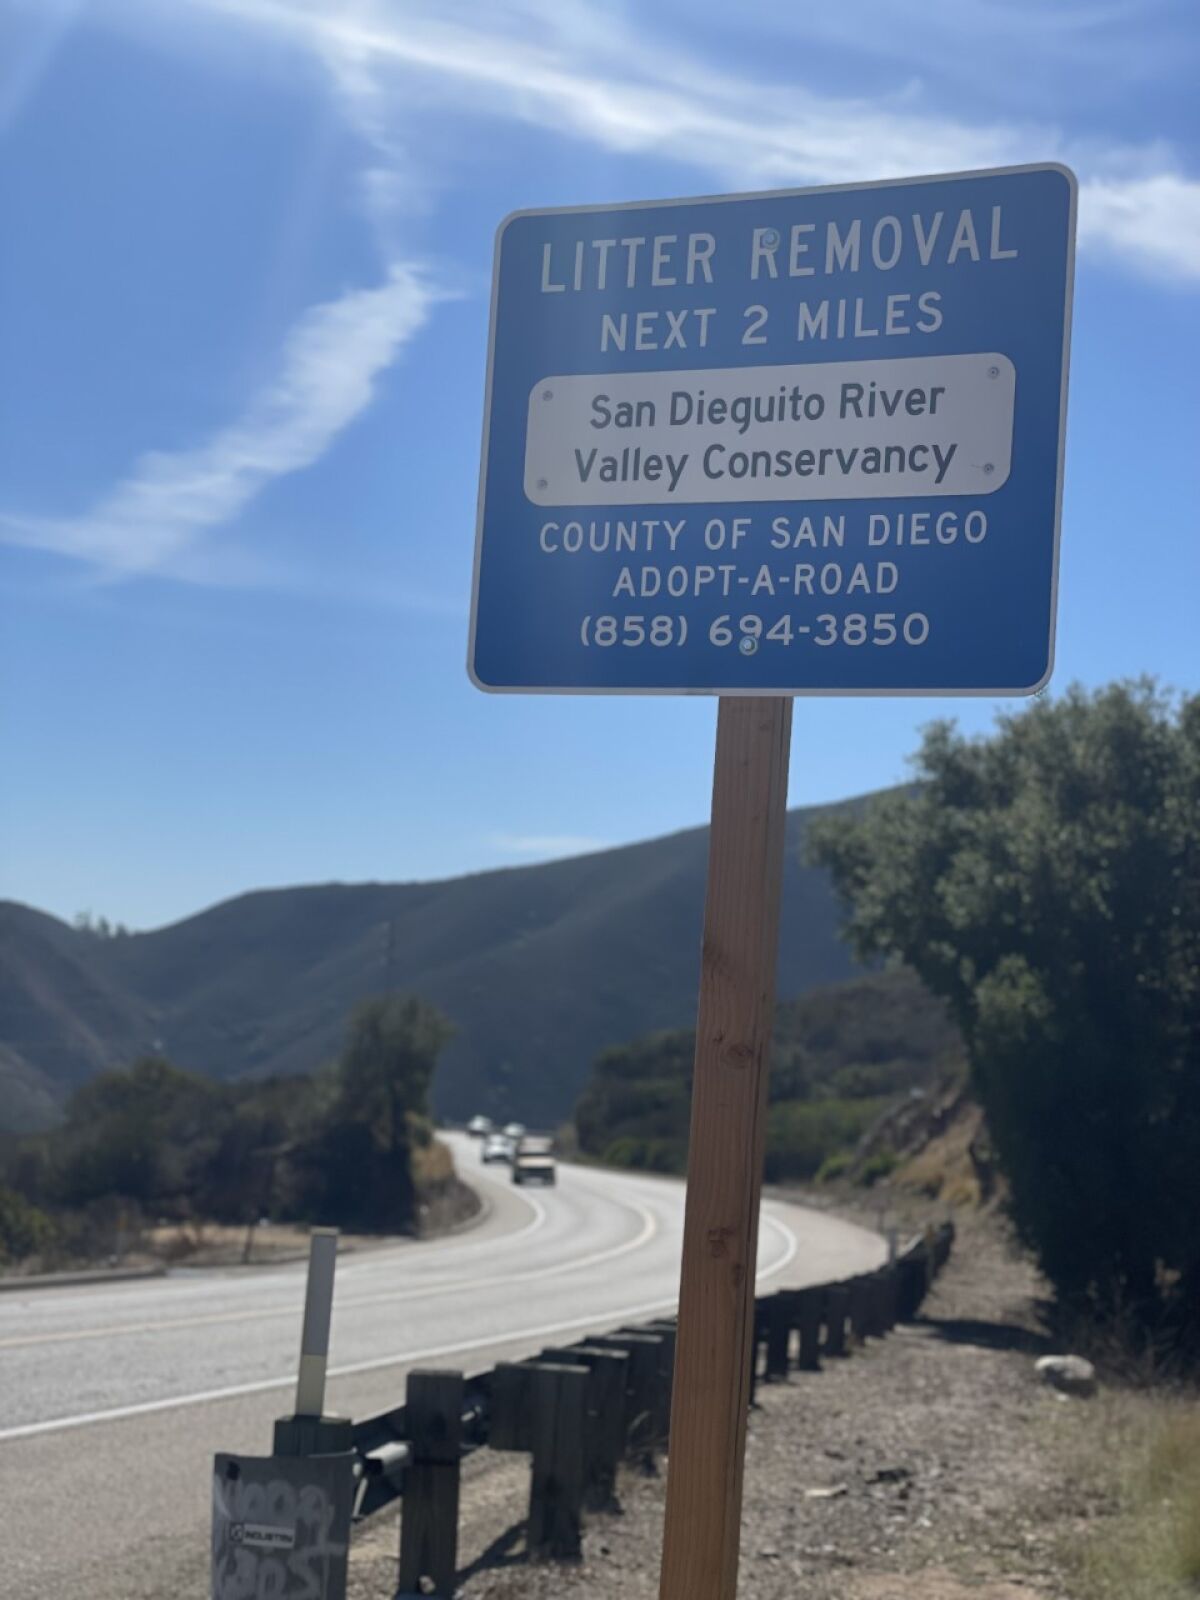 The County of San Diego’s Adopt-a-Road program 